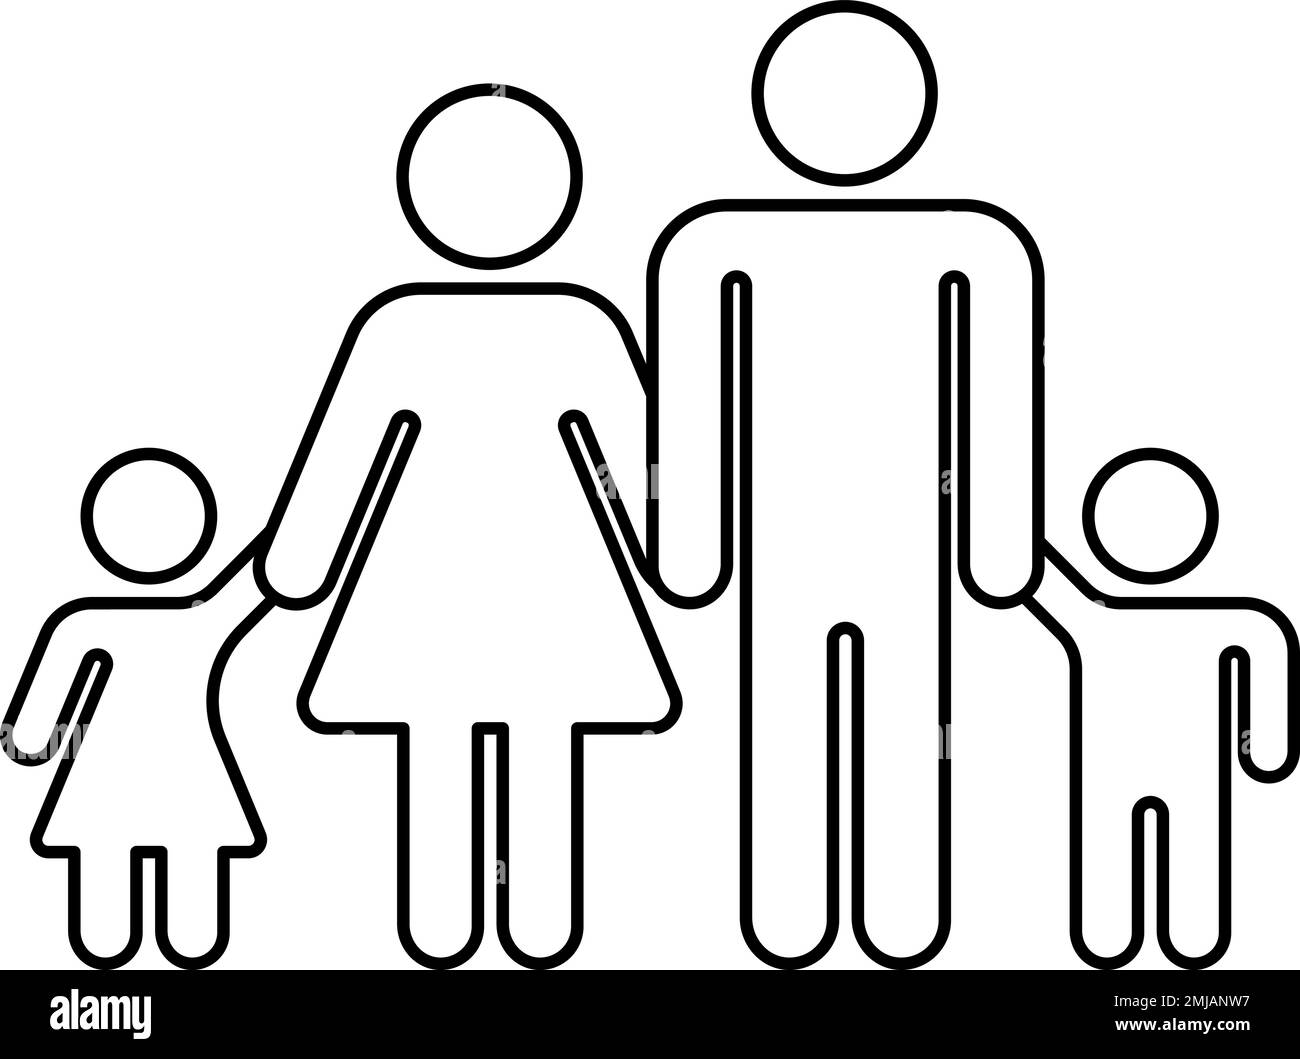 Family line icon. Parents with two kids symbol Stock Vector